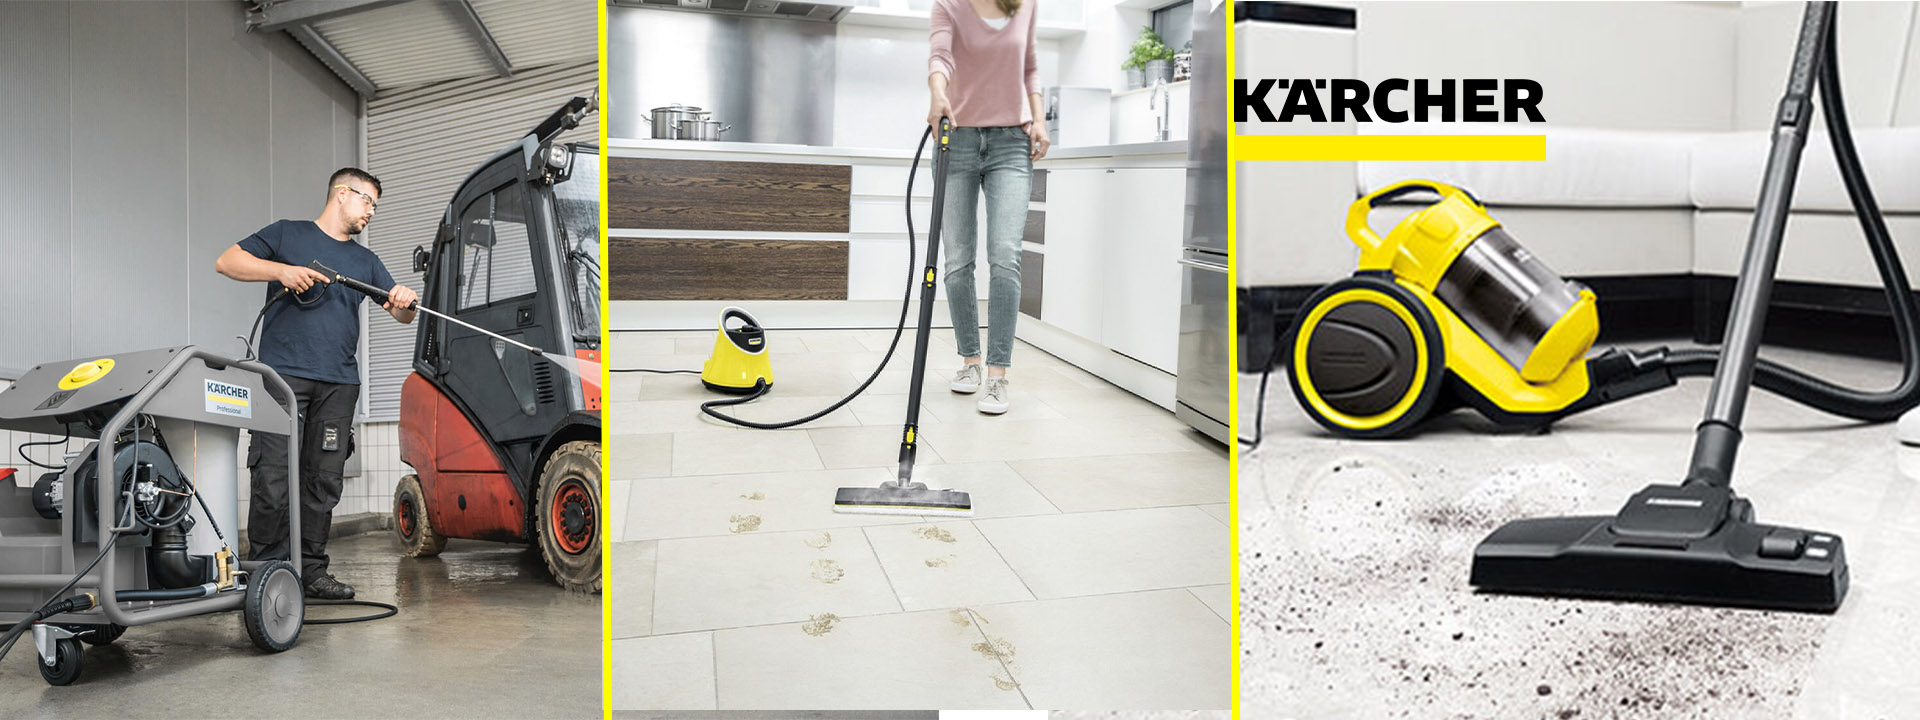 Karcher Cleaning Machine Supplier in Ahmedabad